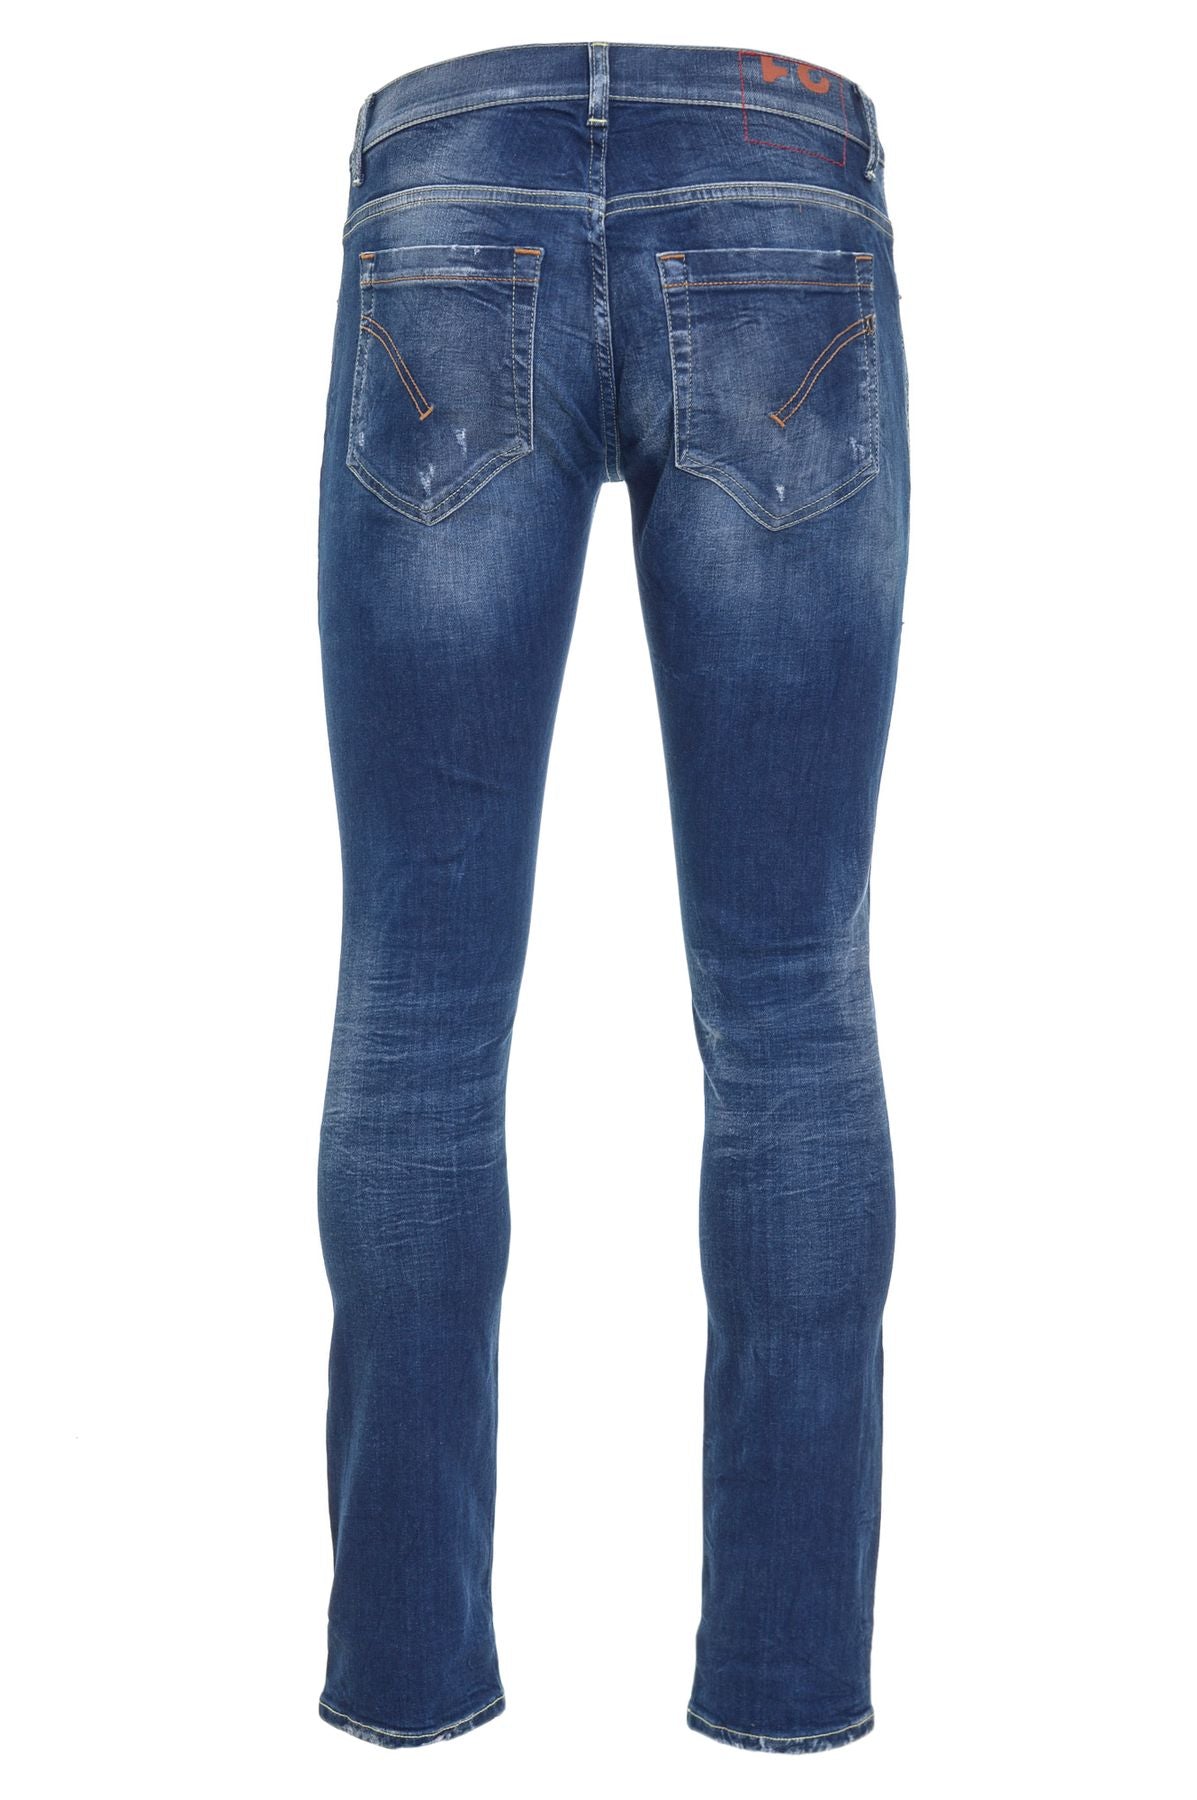 DONDUP Jeans Autunno/Inverno up232dse317udf2